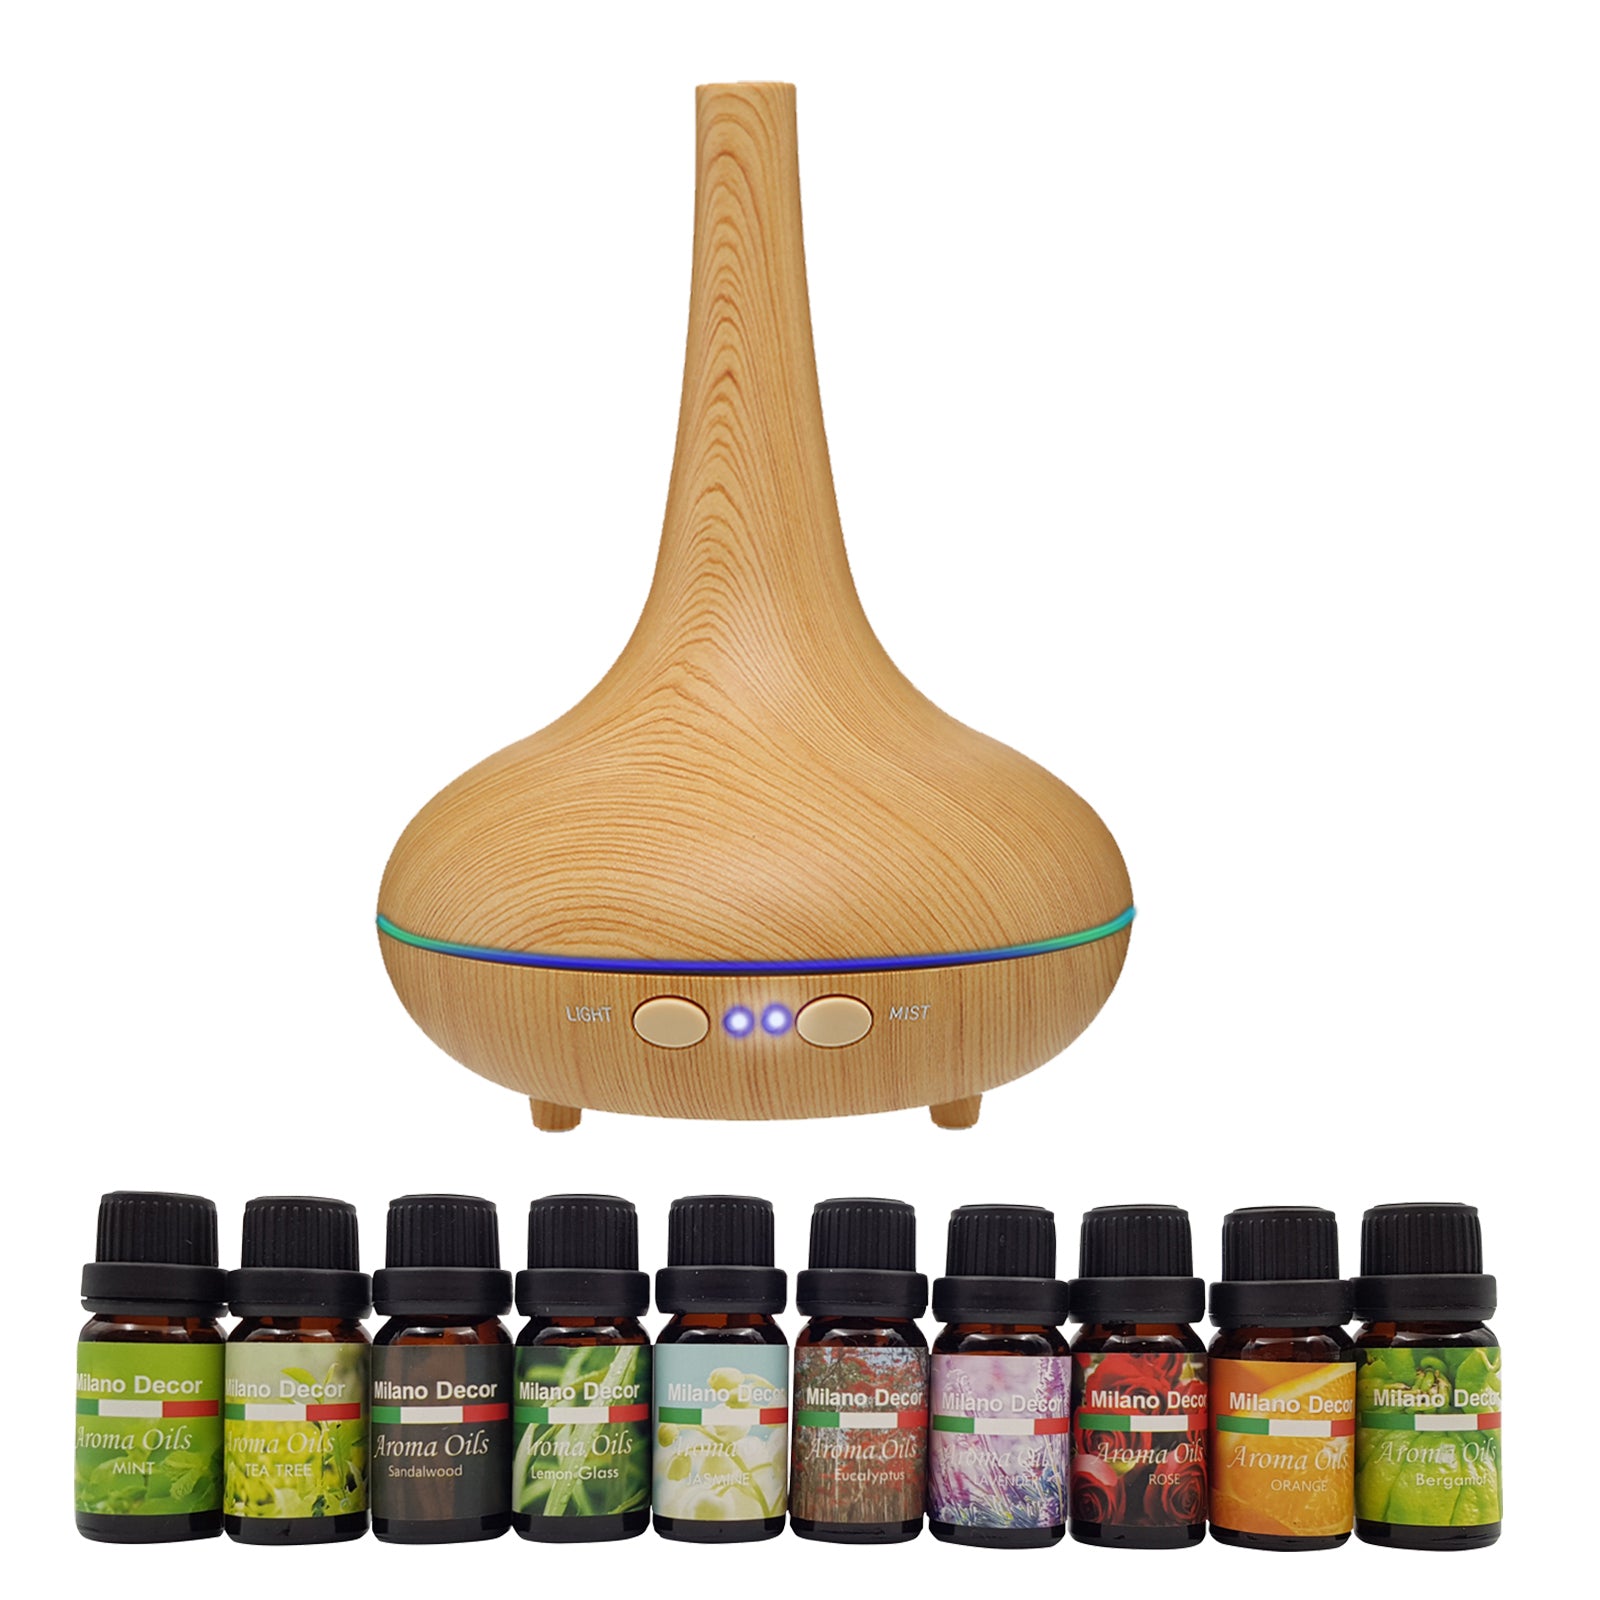 Milano Aroma Diffuser Set With 10 Pack Diffuser Oils Humidifier Aromatherapy - Light Wood Deals499